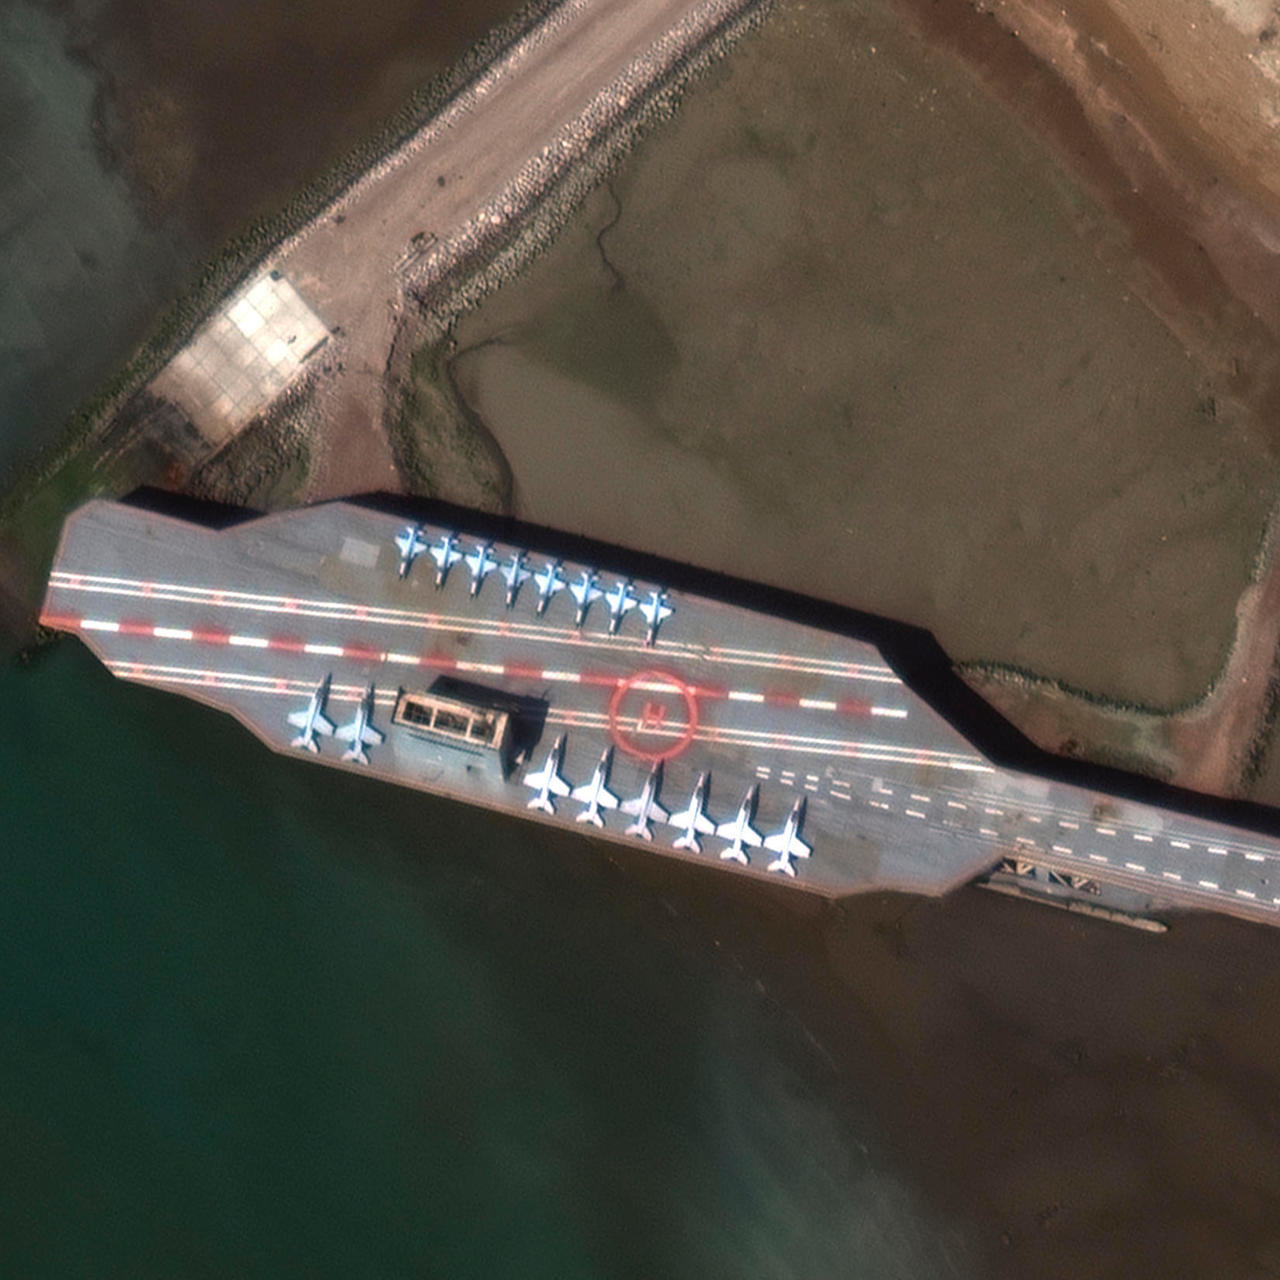 Satellite image obtained courtesy of Maxar Technologies shows a mockup aircraft carrier being prepared in the Iranian port of Bandar Abbas on February 15. Maxar Technologies/AFP